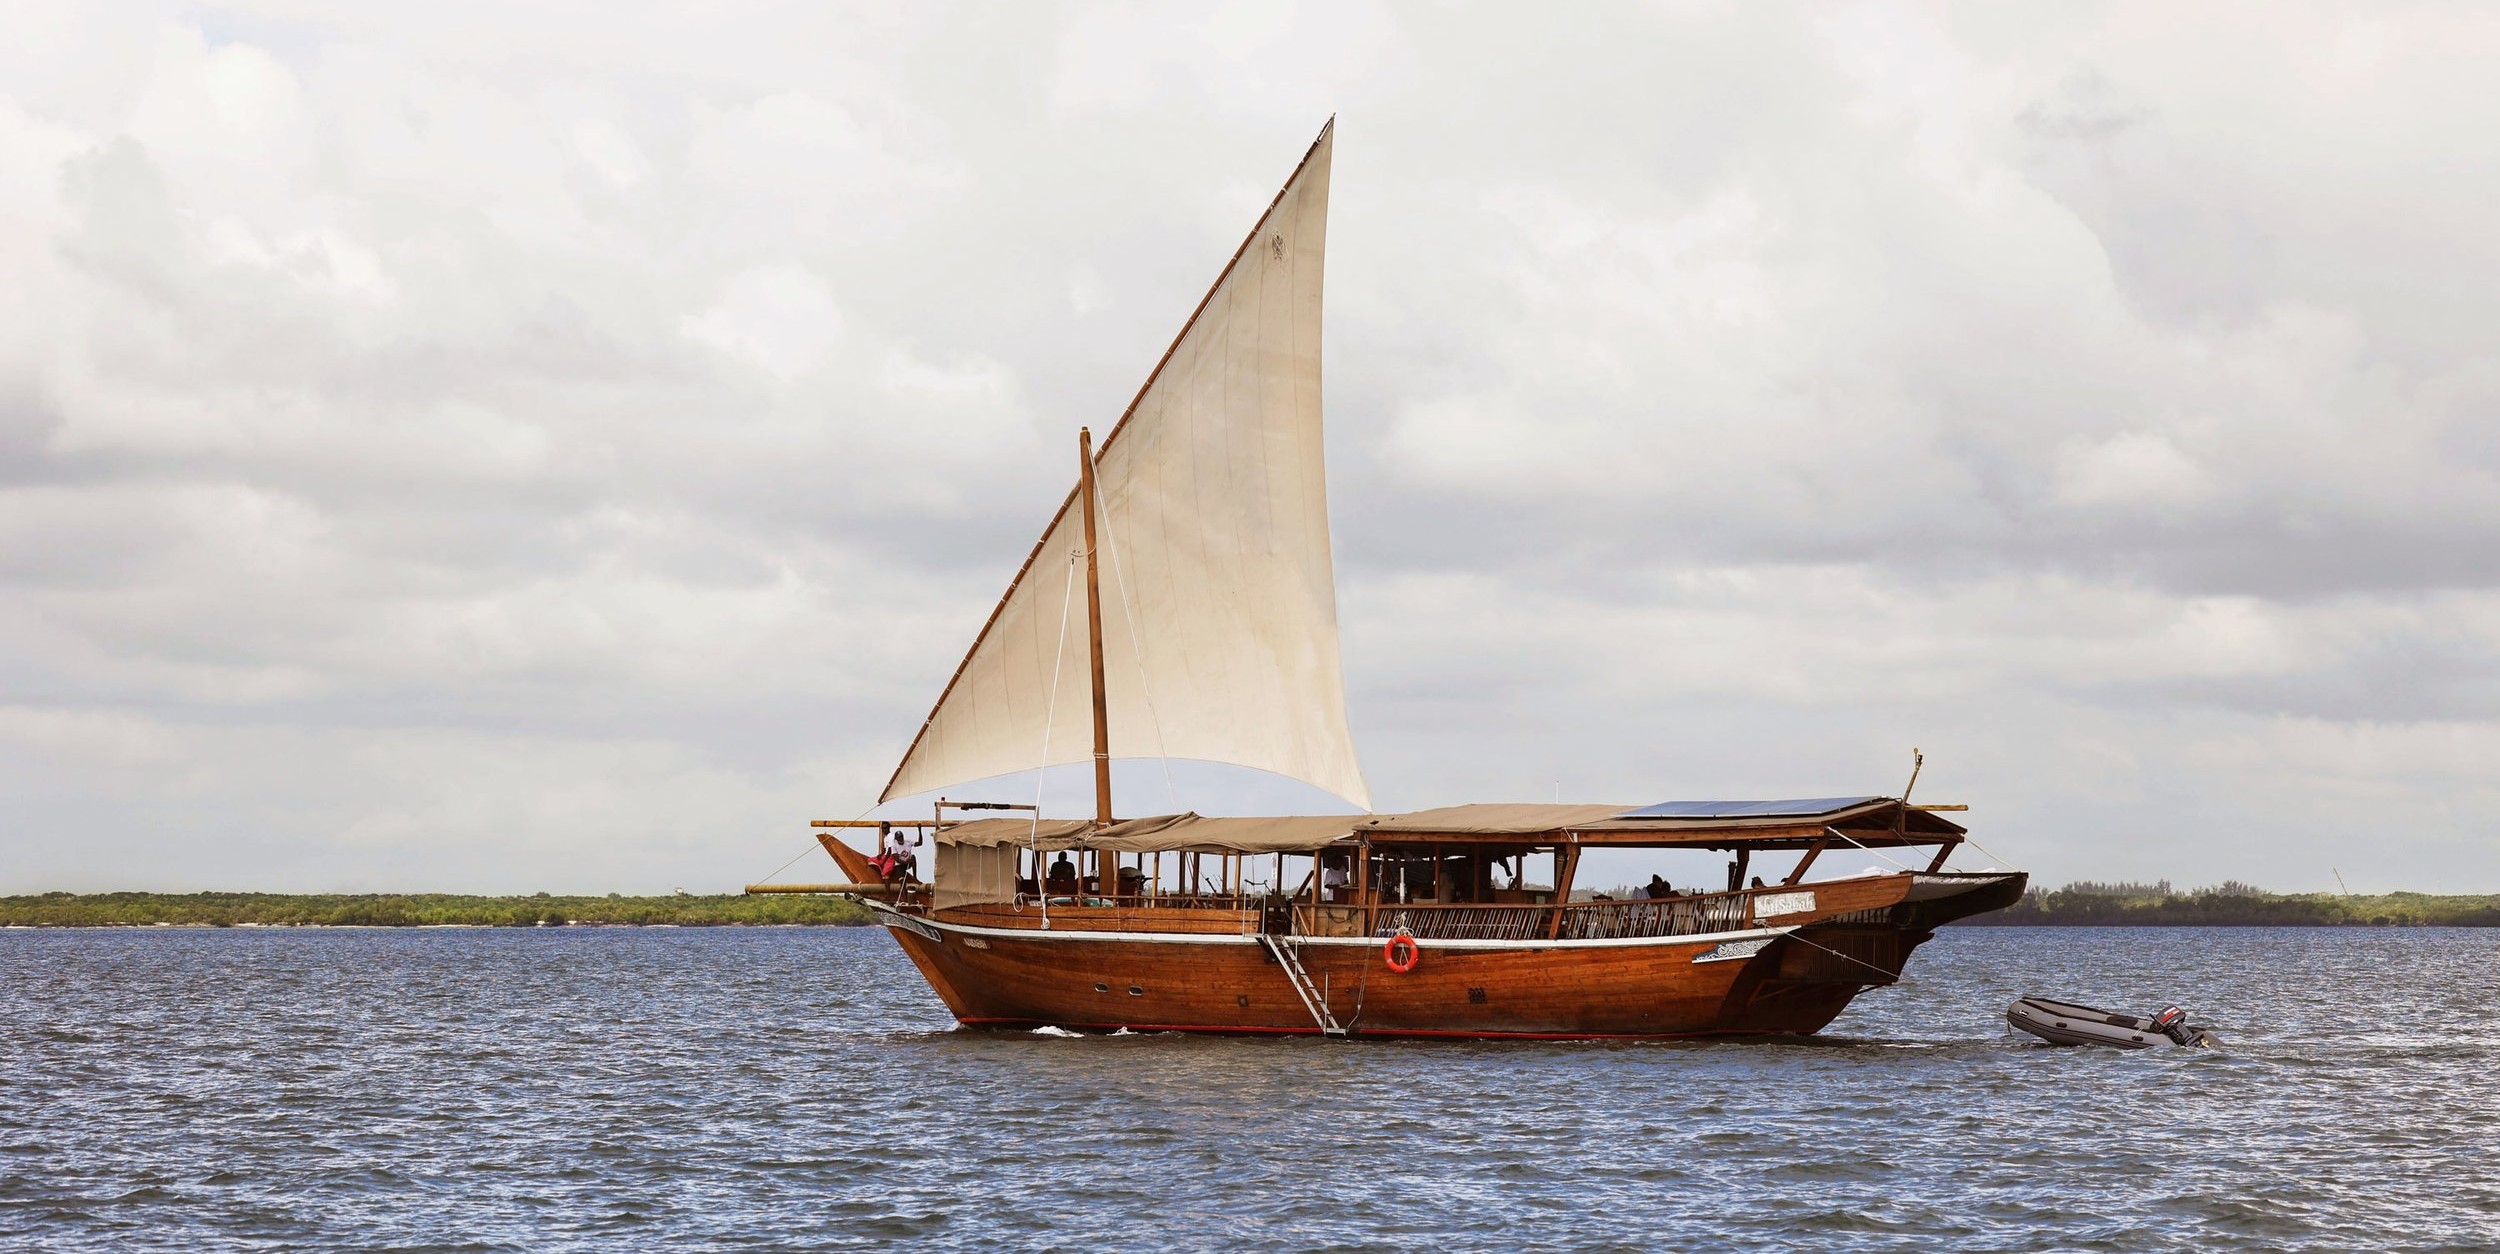 New Kenyan dhow adventure launched